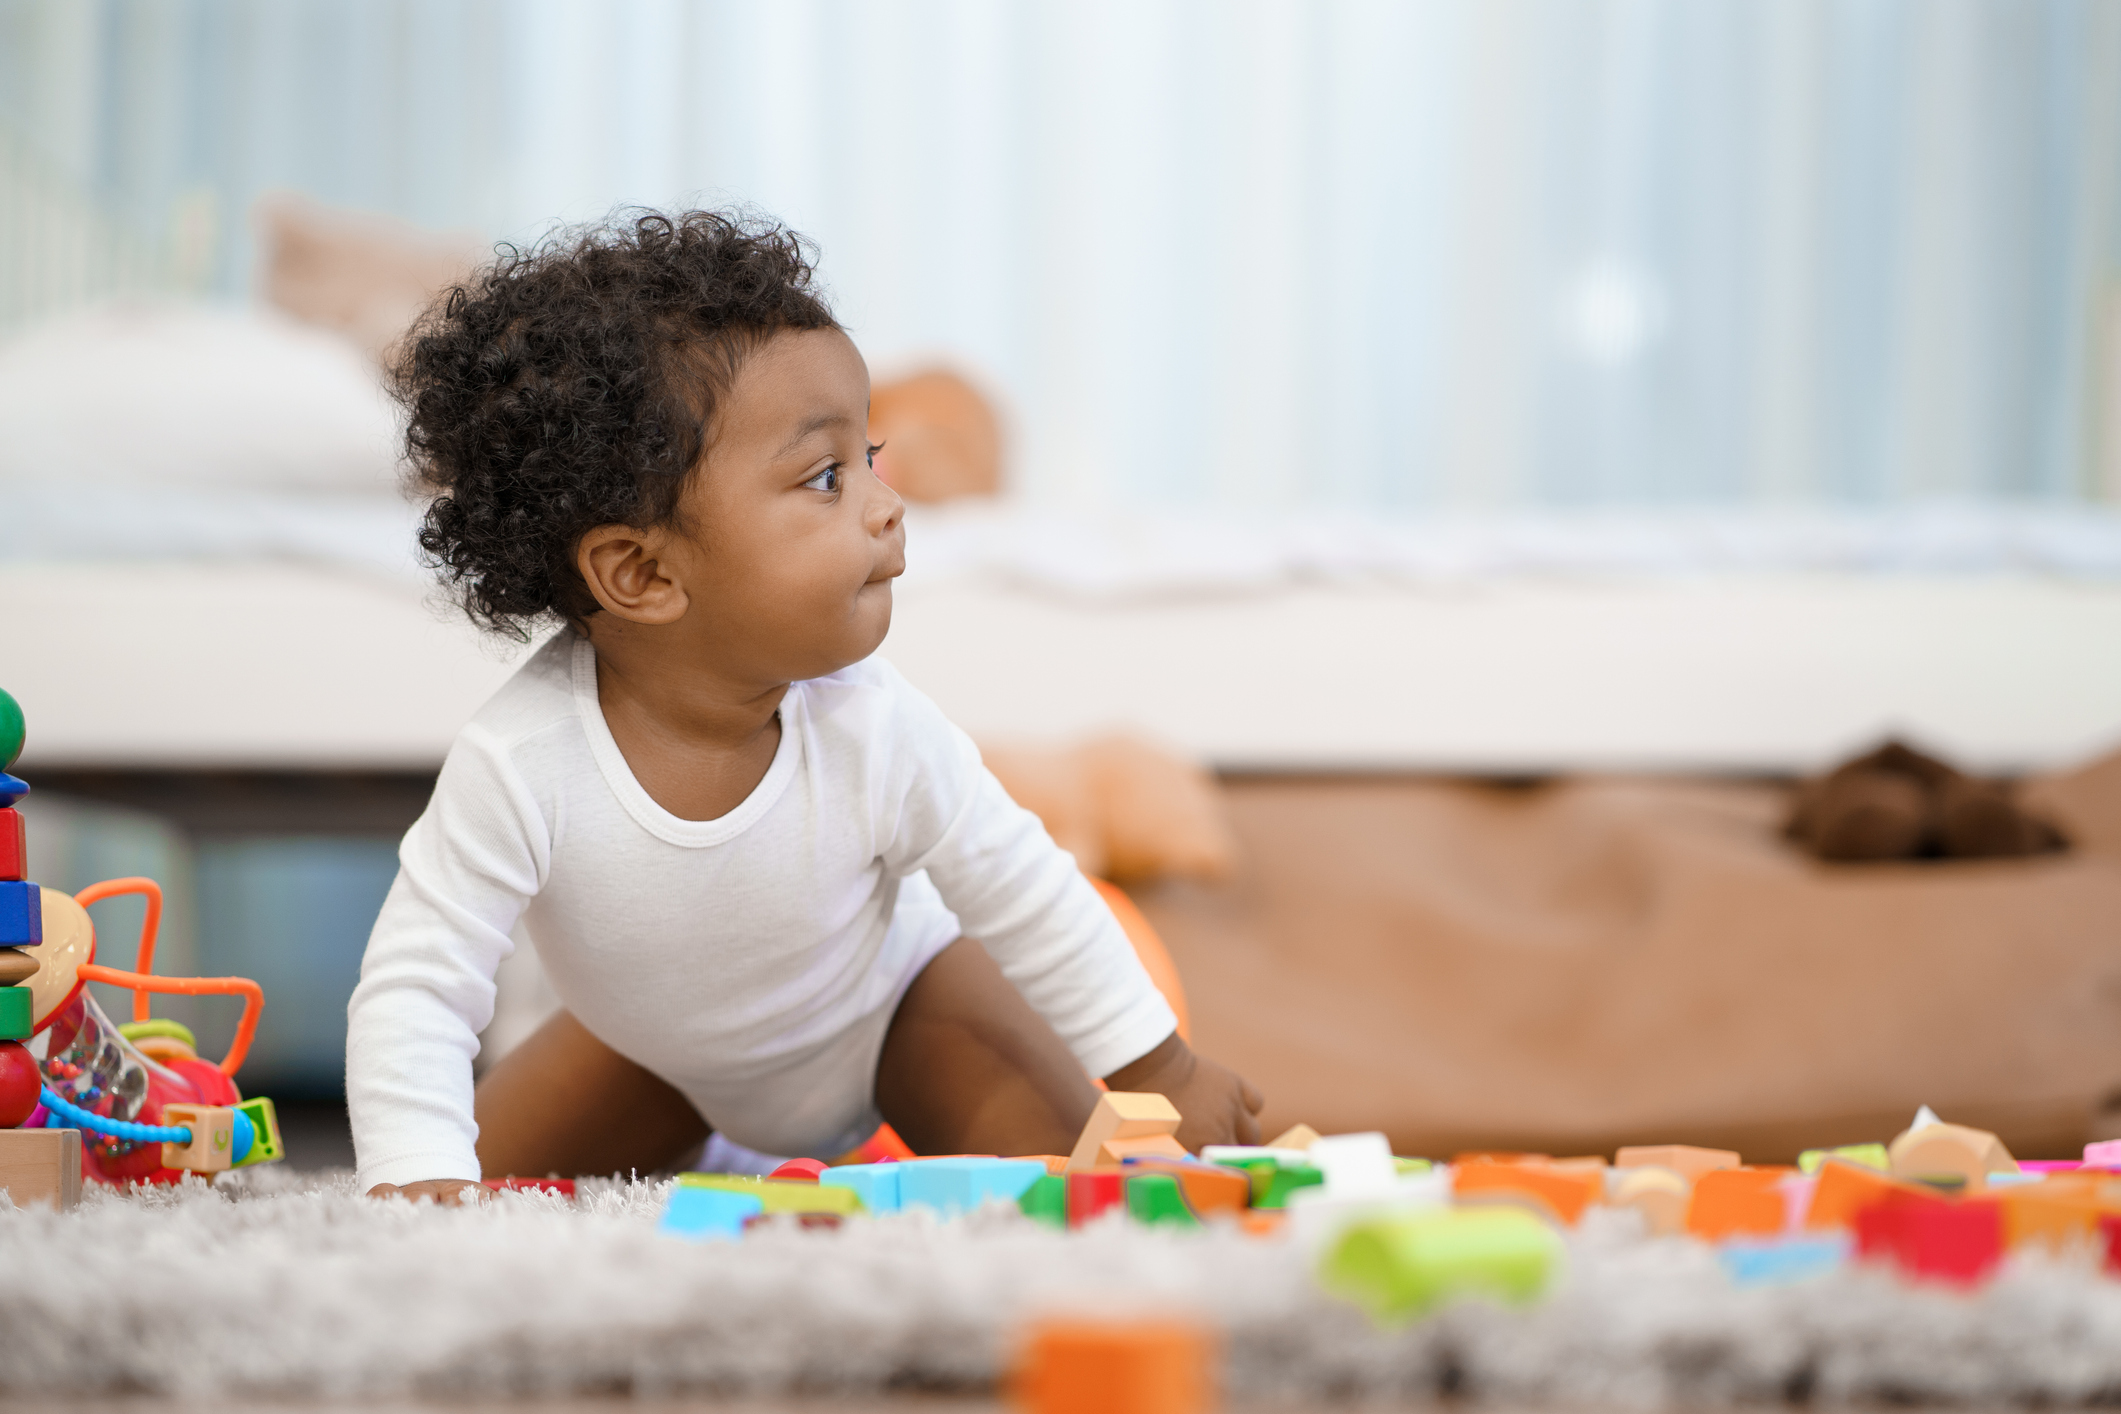 Infant crawling amongst toys in bedroom